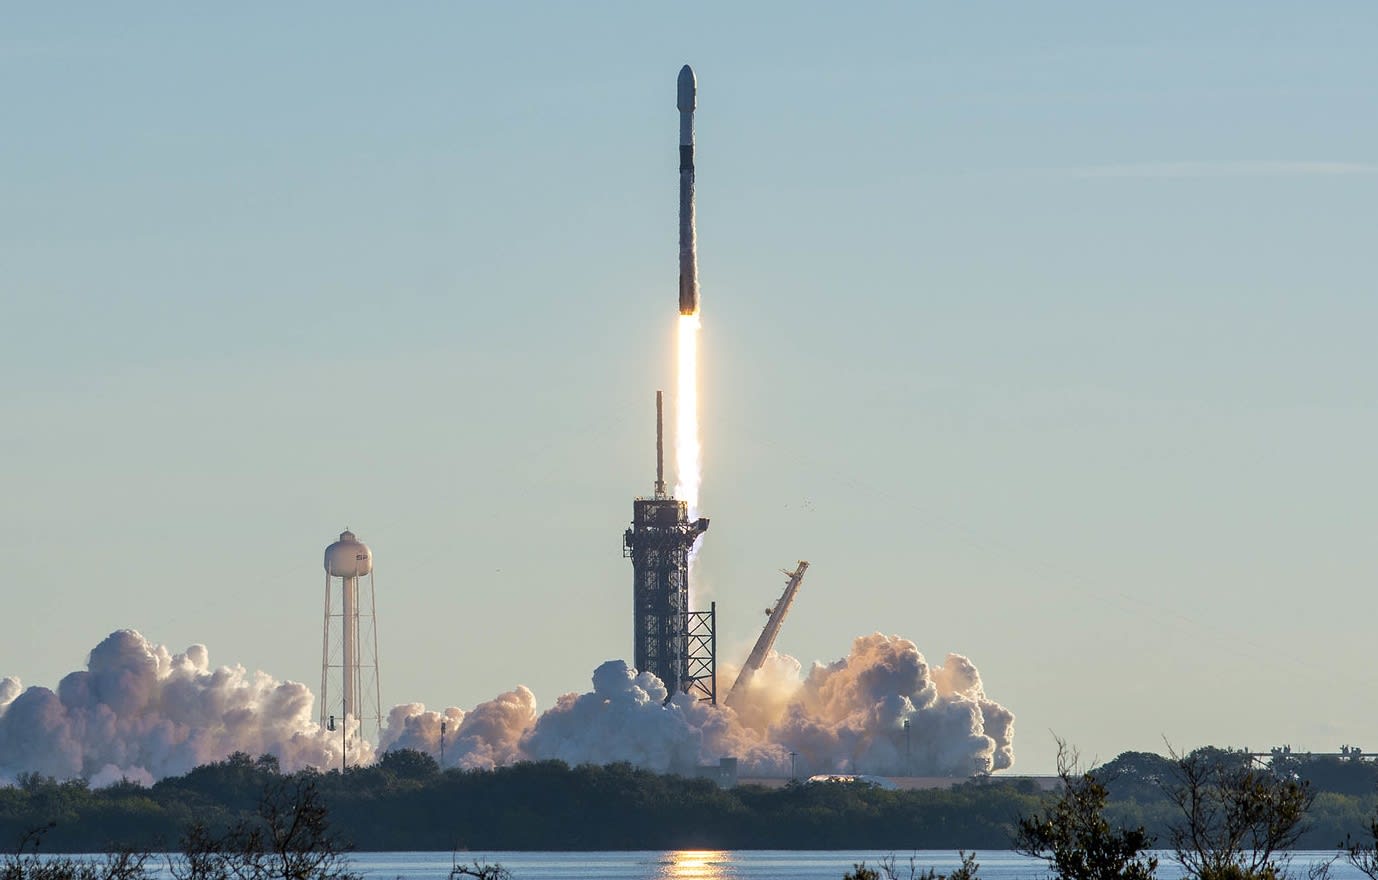 $1.9 billion invested, led by SpaceX